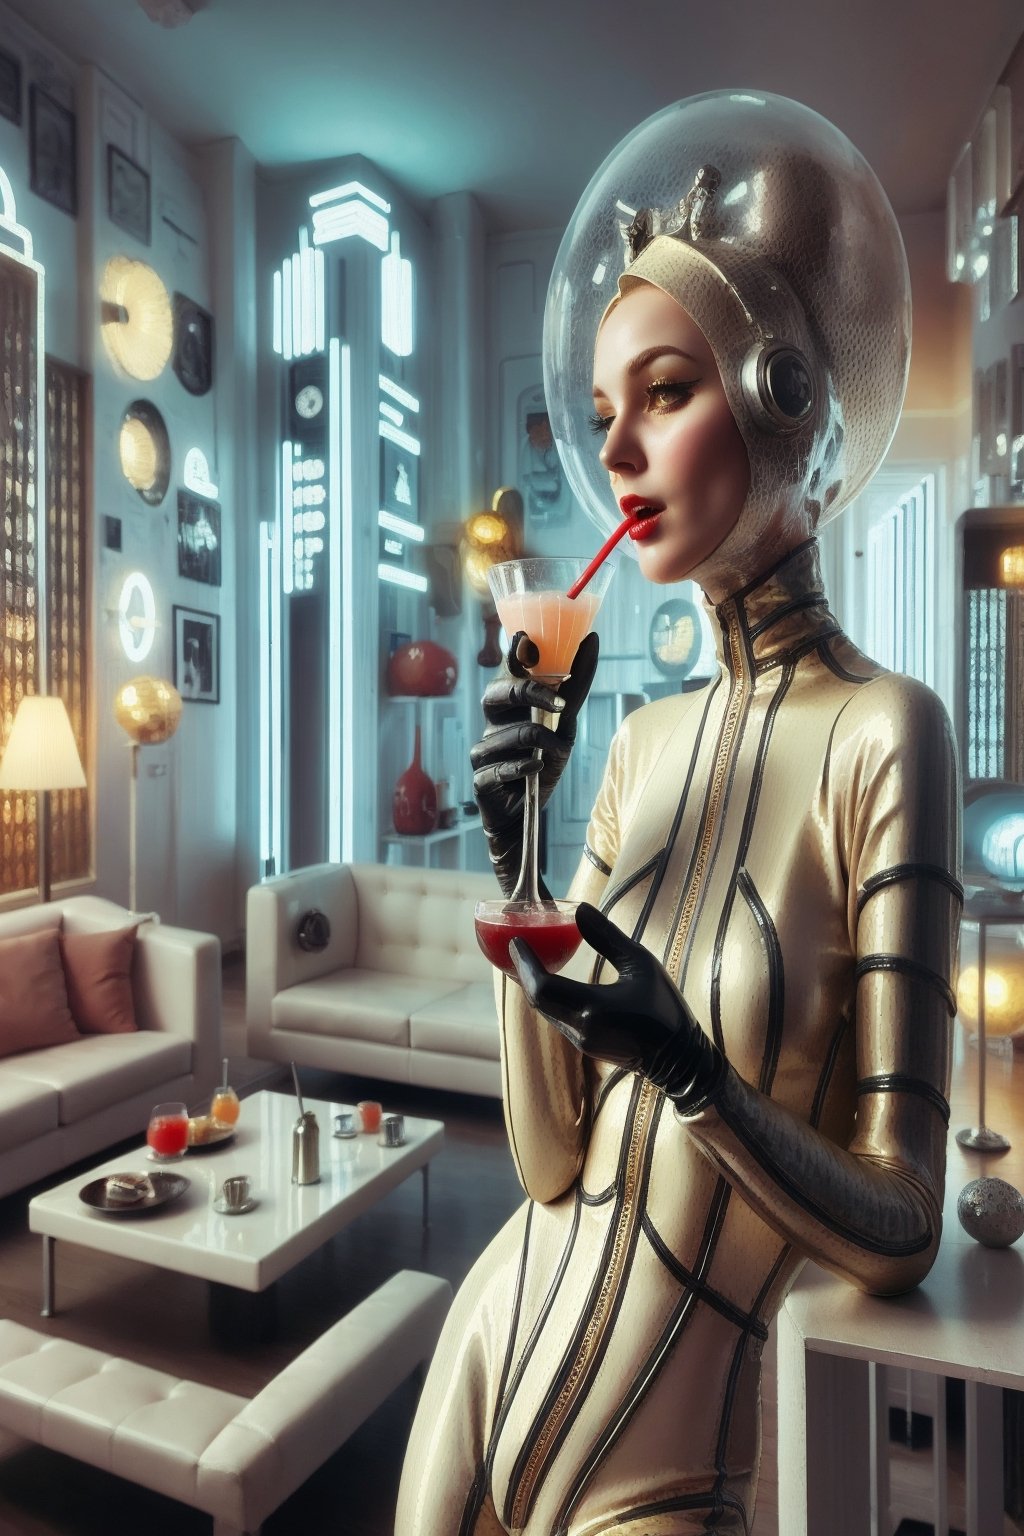 berlin megacity retro-futuristic with styles of jugend and art deco a living room woman enjoying a delicious coctail in stylish surroundings with state of the art furnitures and lights,she is wearing bizarre obscure wholebodyrubbersuitwithaccessories fashion photo shoot